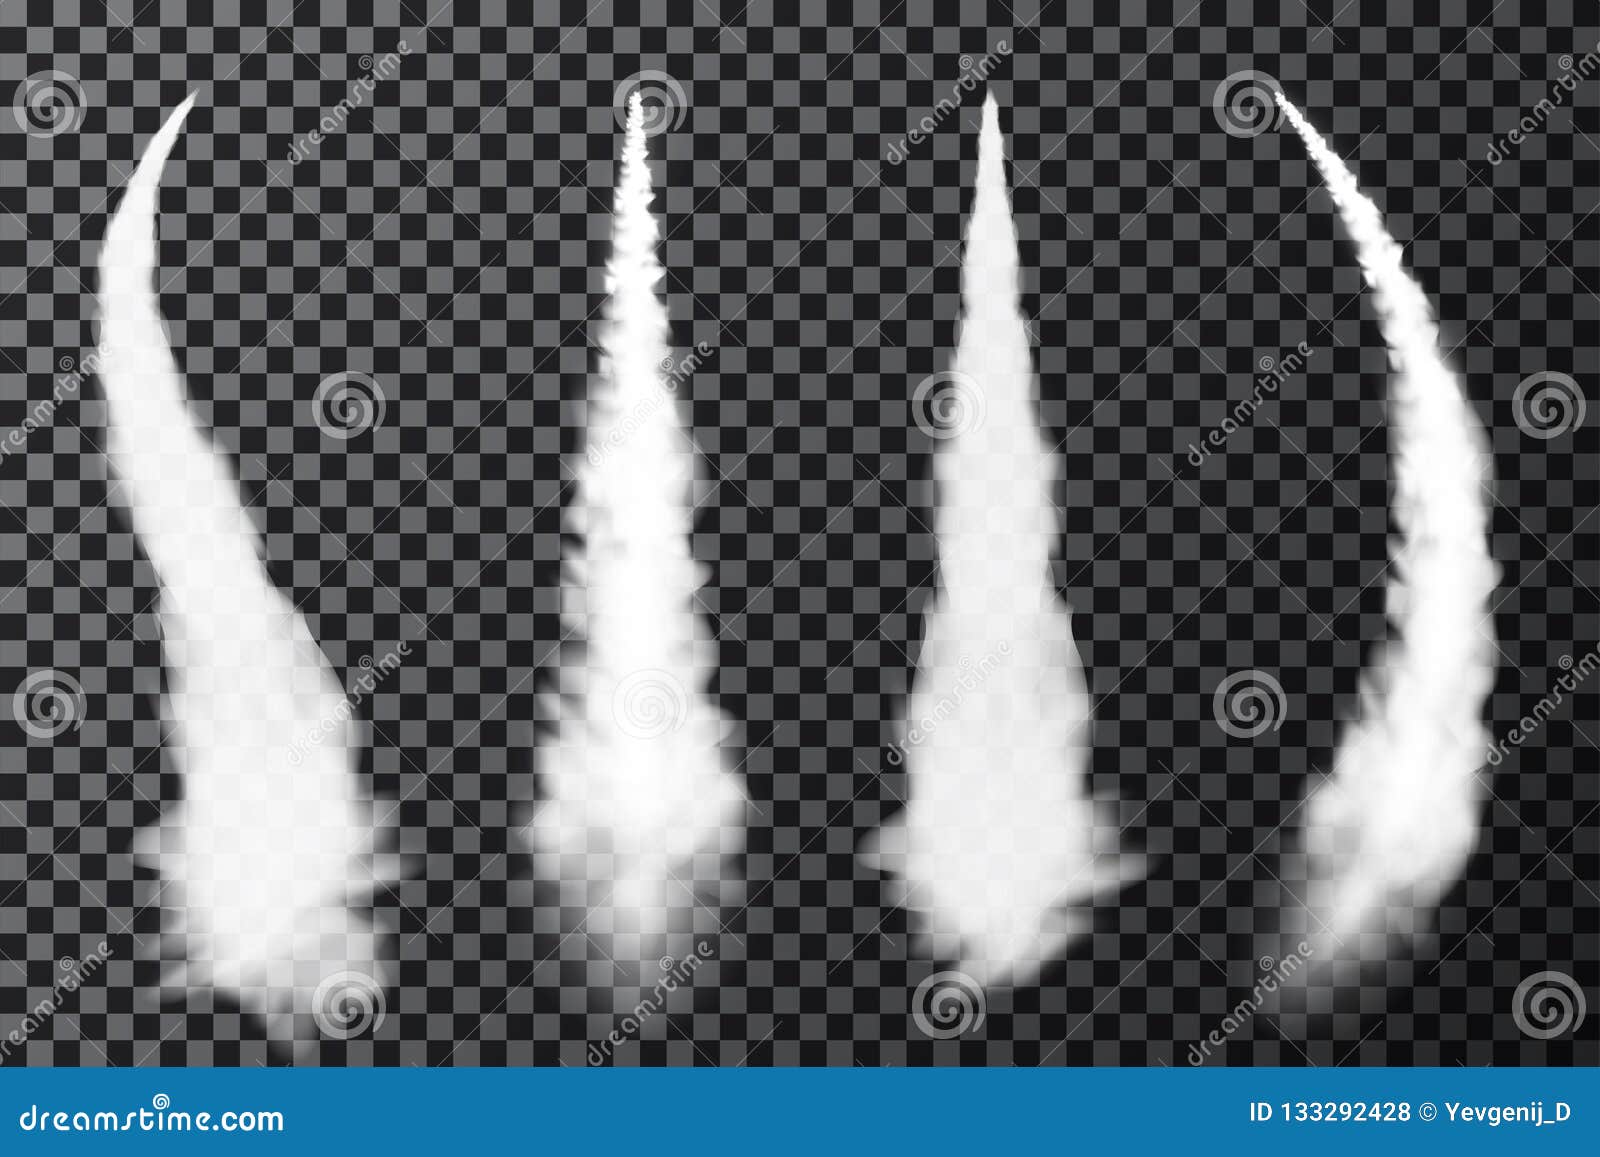 realistic airplane condensation trails. smoke from jet or rocket launch. set of smoke contrails